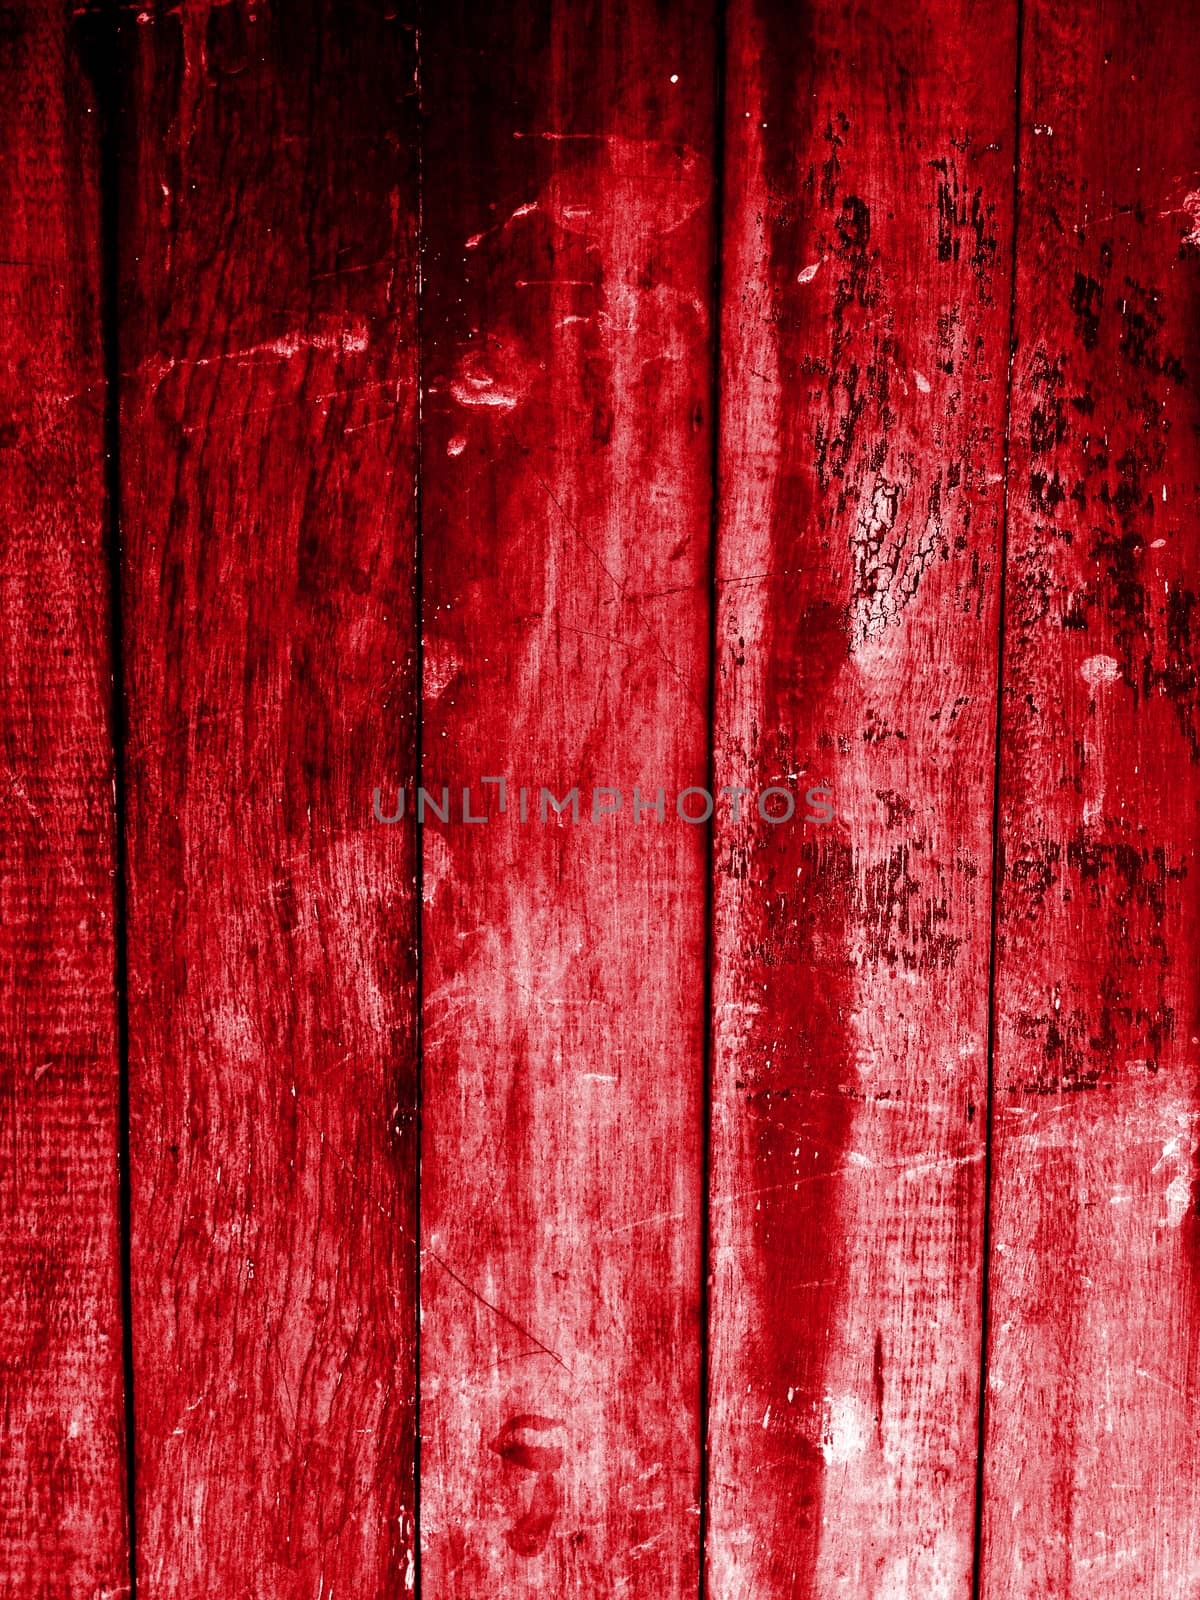 Abstract Grunge Old Wood Background 